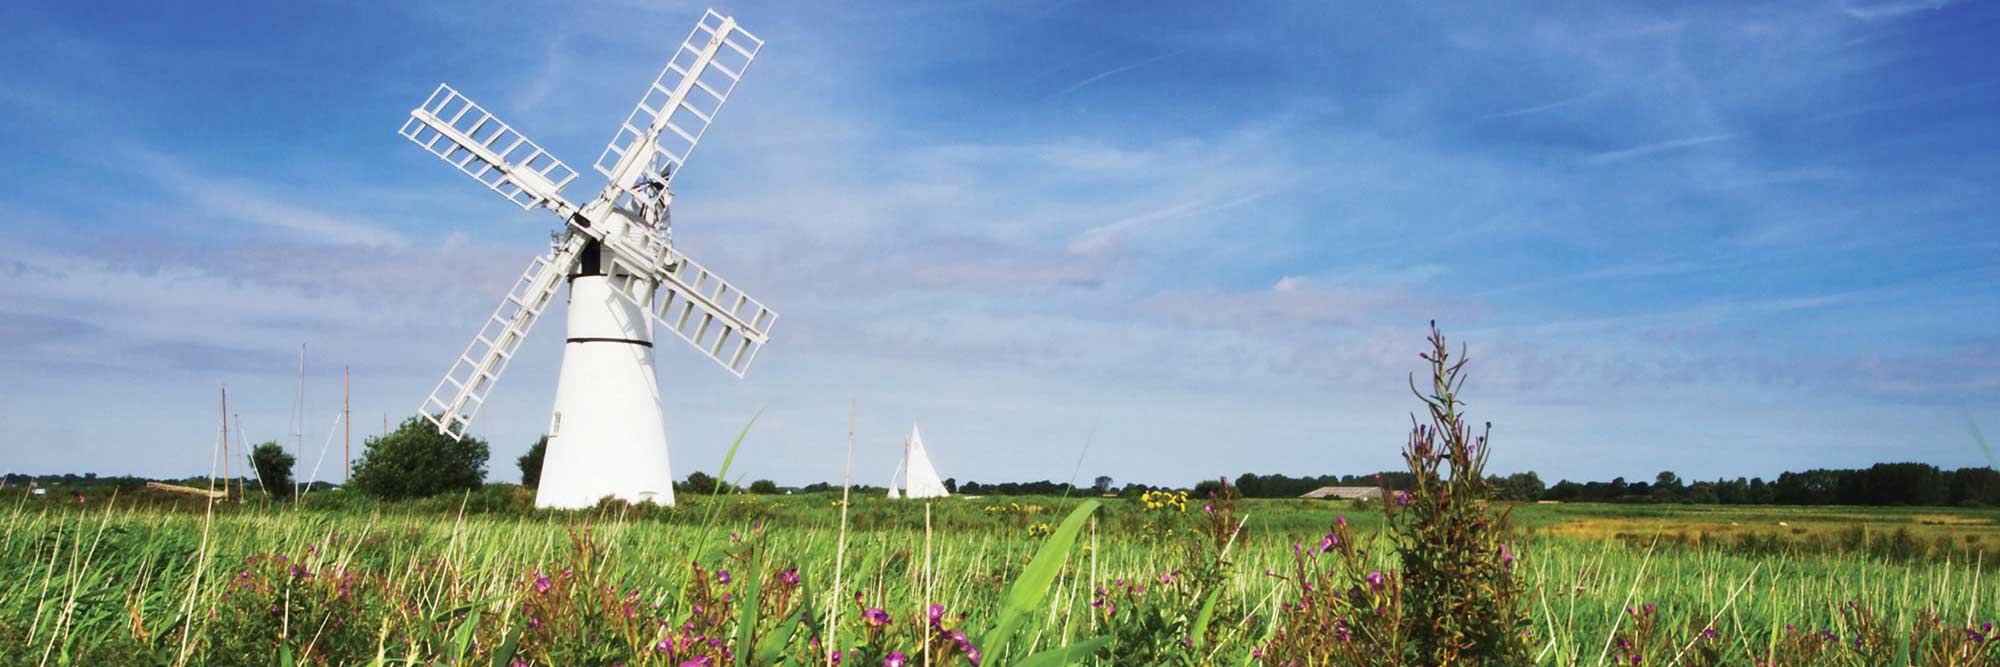 A white windmill against blue sky